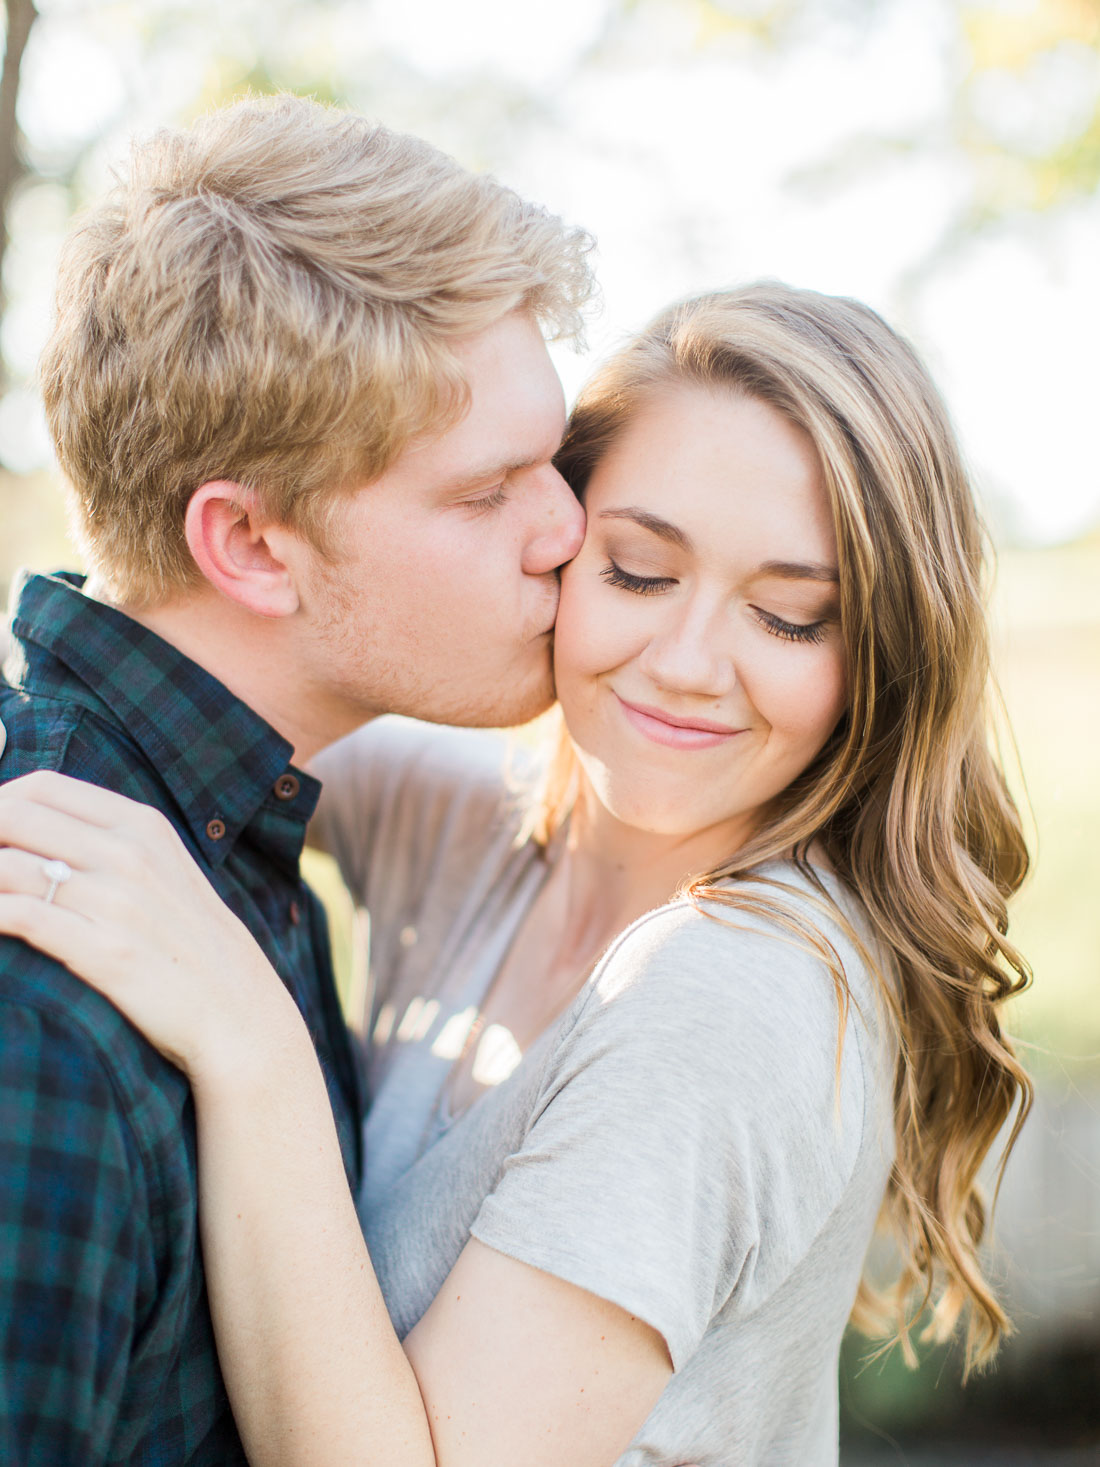 Tori and Christian Engagement Photos - Fort Worth Wedding Photographer - Fort Worth Engagement Photographer - College Station - Bryan - Houston - Dallas - Fort Worth - Wedding Photographer - Texas Wedding Photographer - Research Park - Aggie Engagement Session